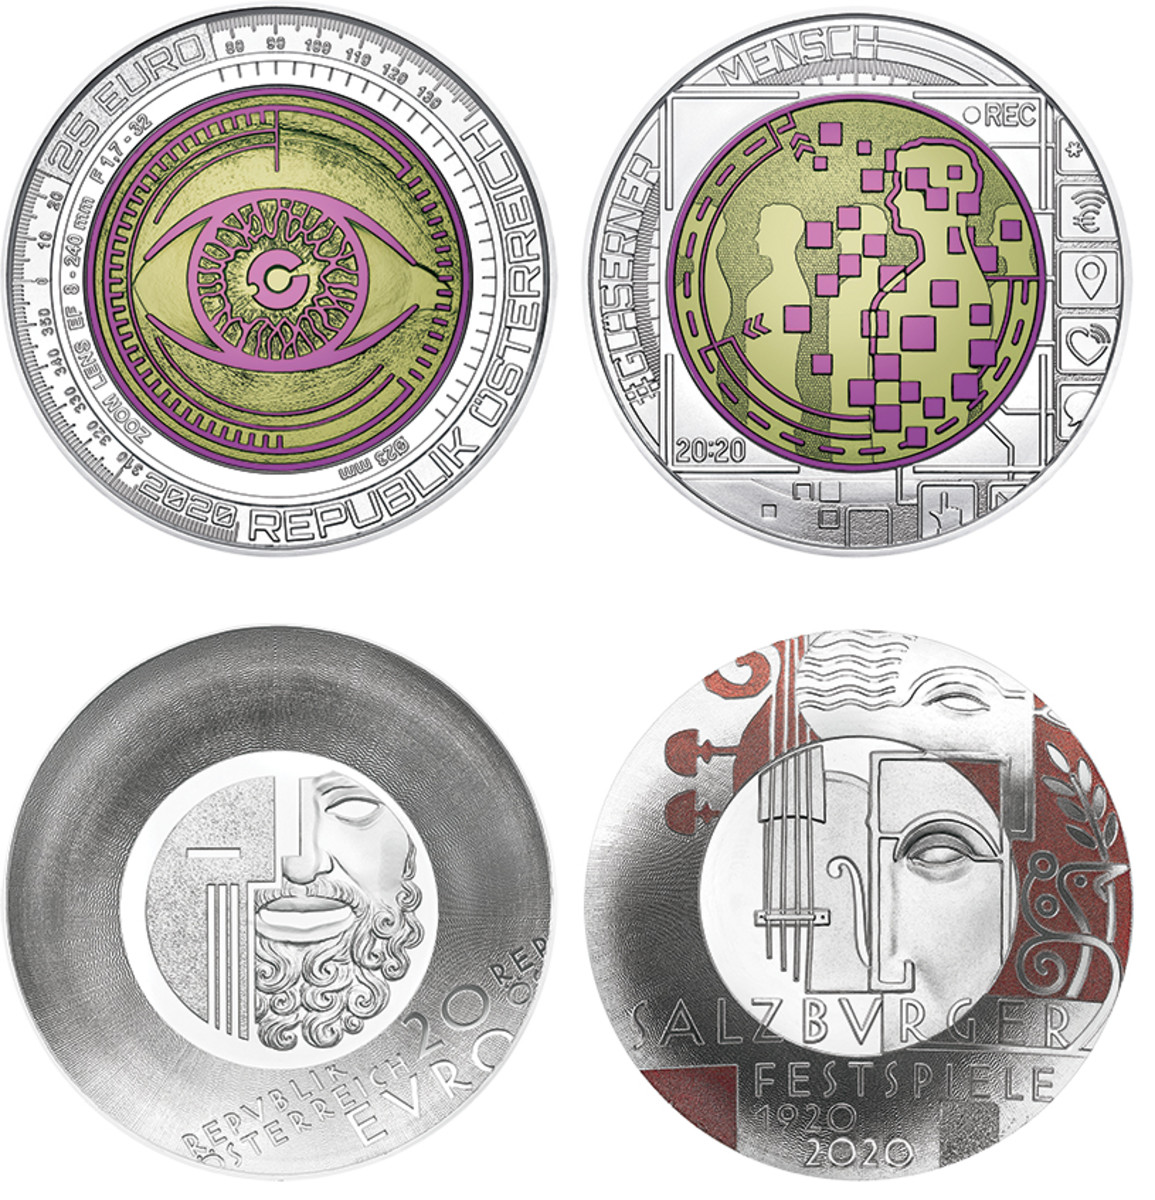 Austria also produced winners in the Best Bi-Metallic Coin category with its “Big Data” silver niobium 25-euro (top left) and Most Artistic Coin category with its curved “Centenary of the Salzburg Festival” silver 20-euro.